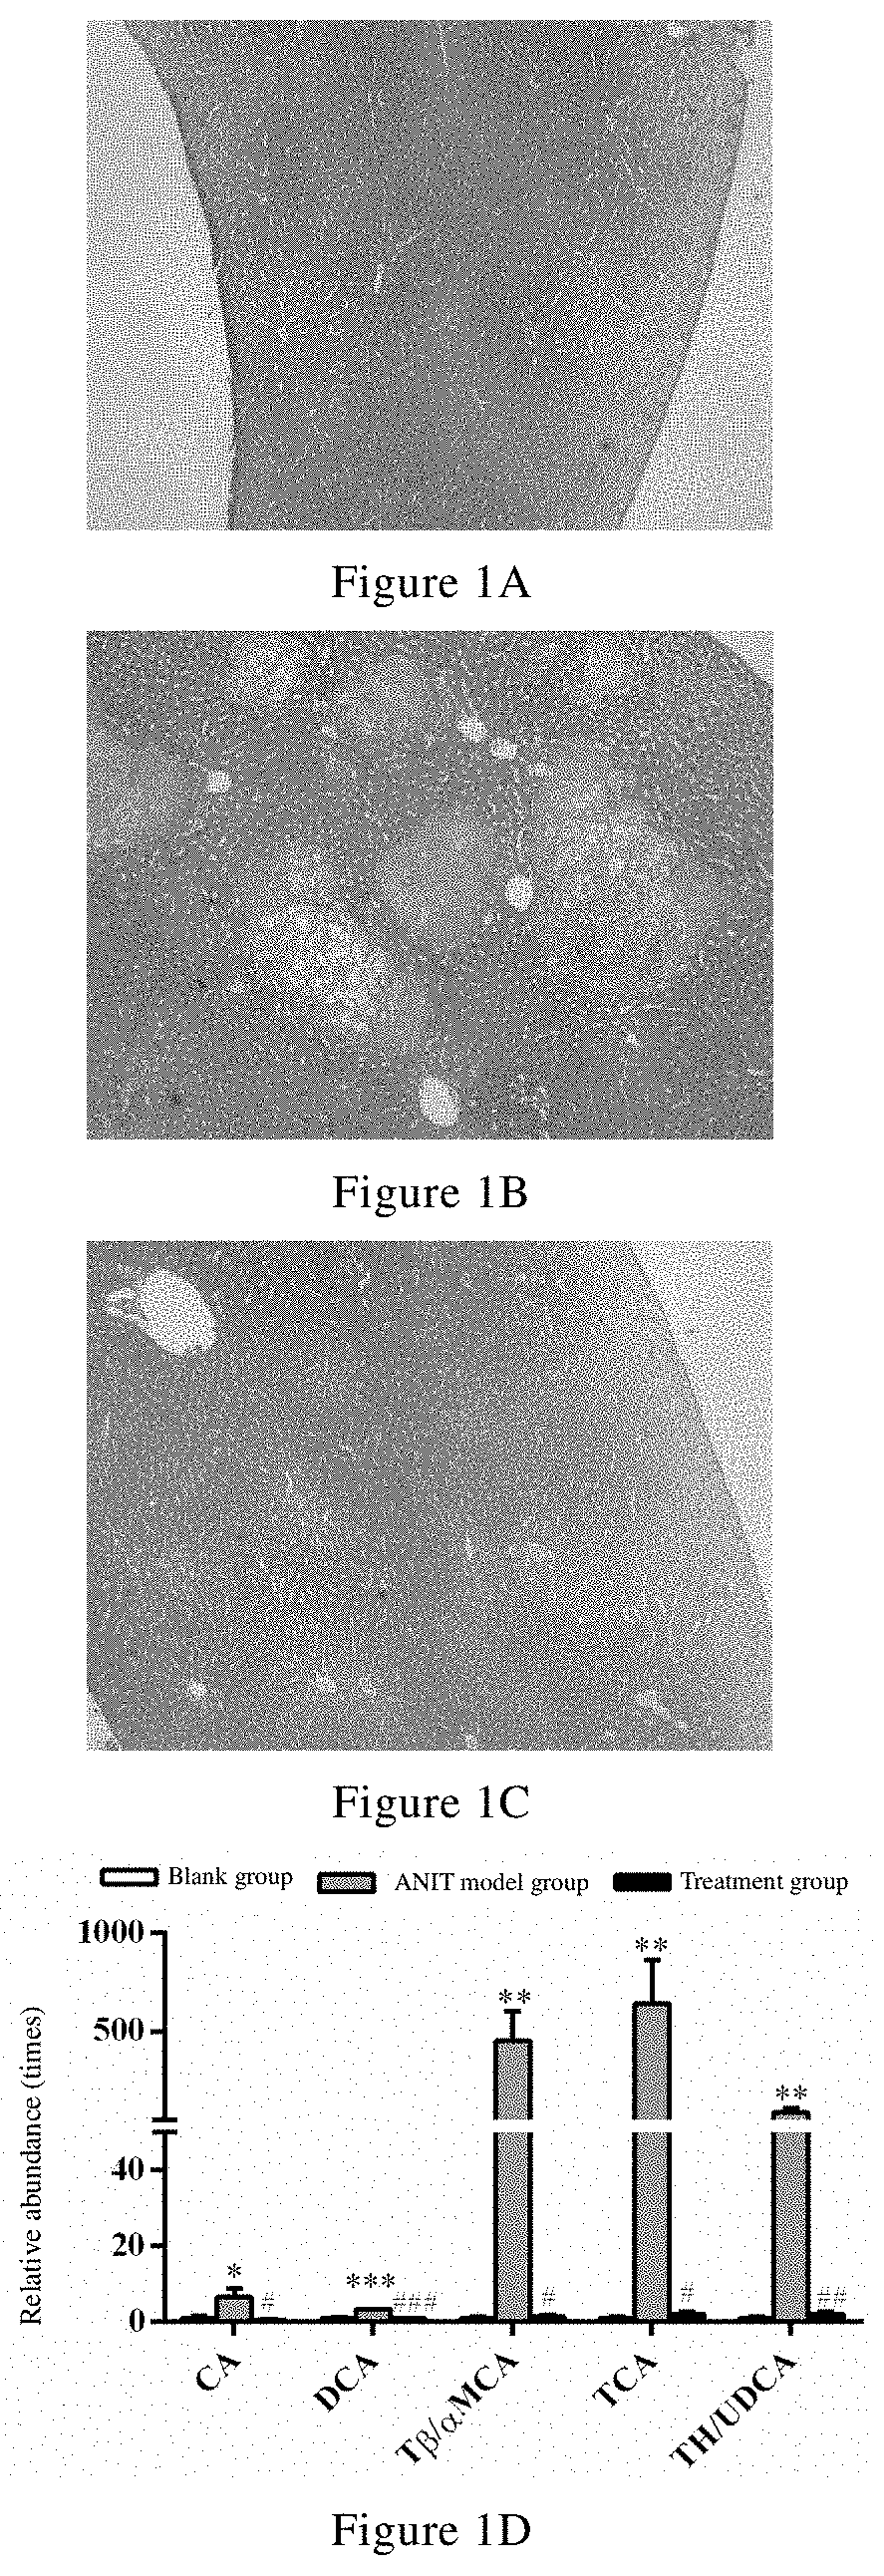 Uses of celastrol in preventing and/or treating cholestatic liver disease and liver fibrosis